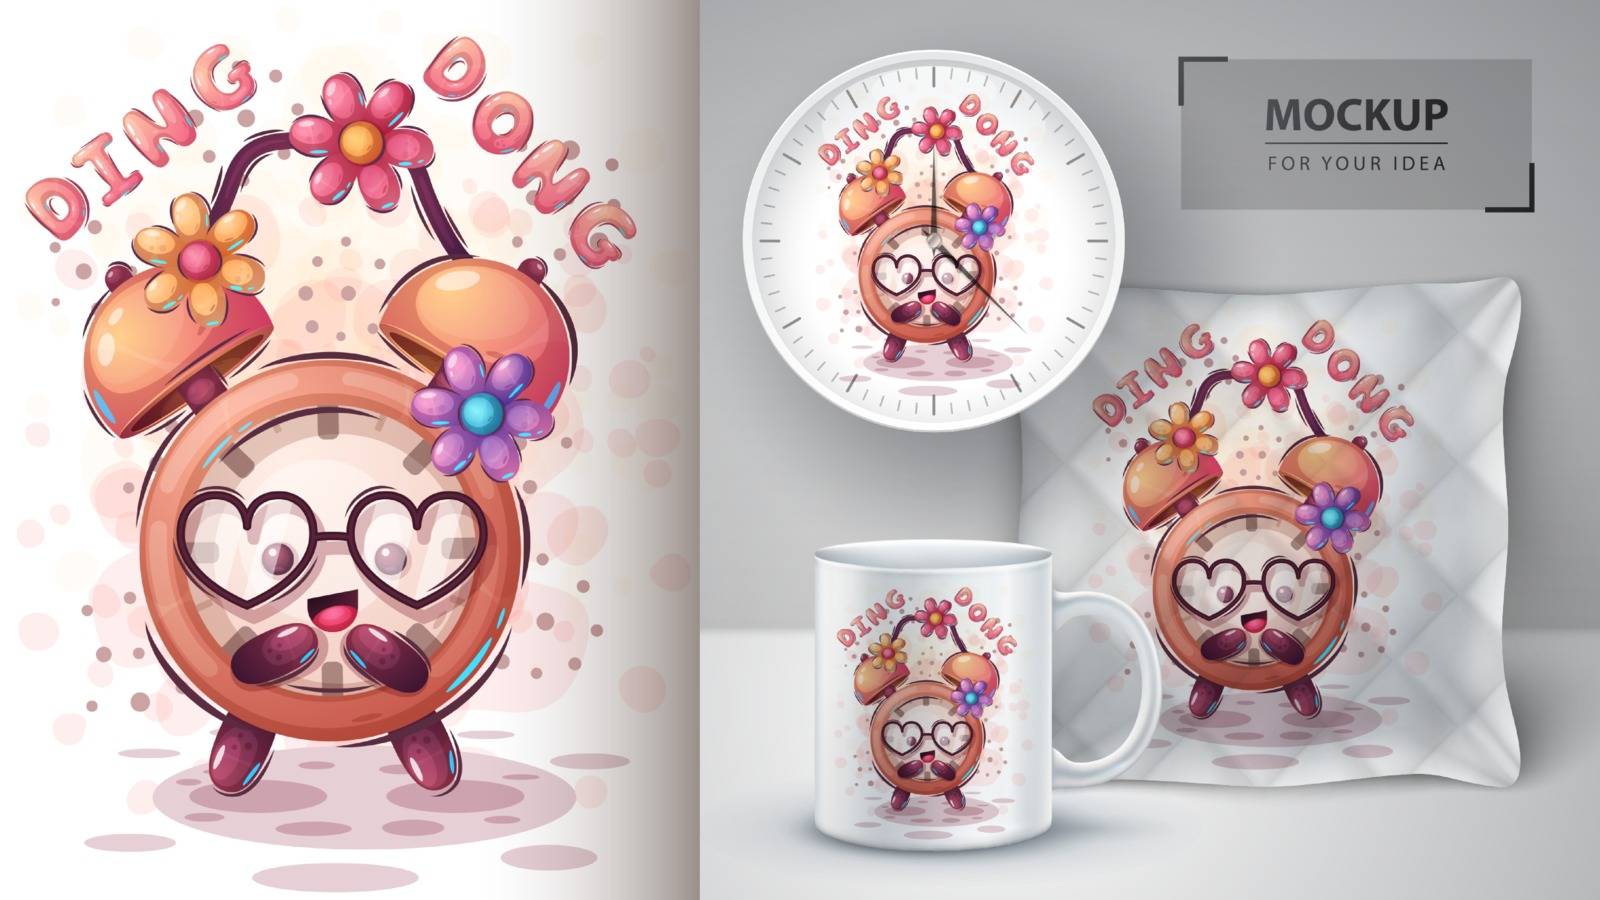 Love alarm clock poster and merchandising. by rwgusev